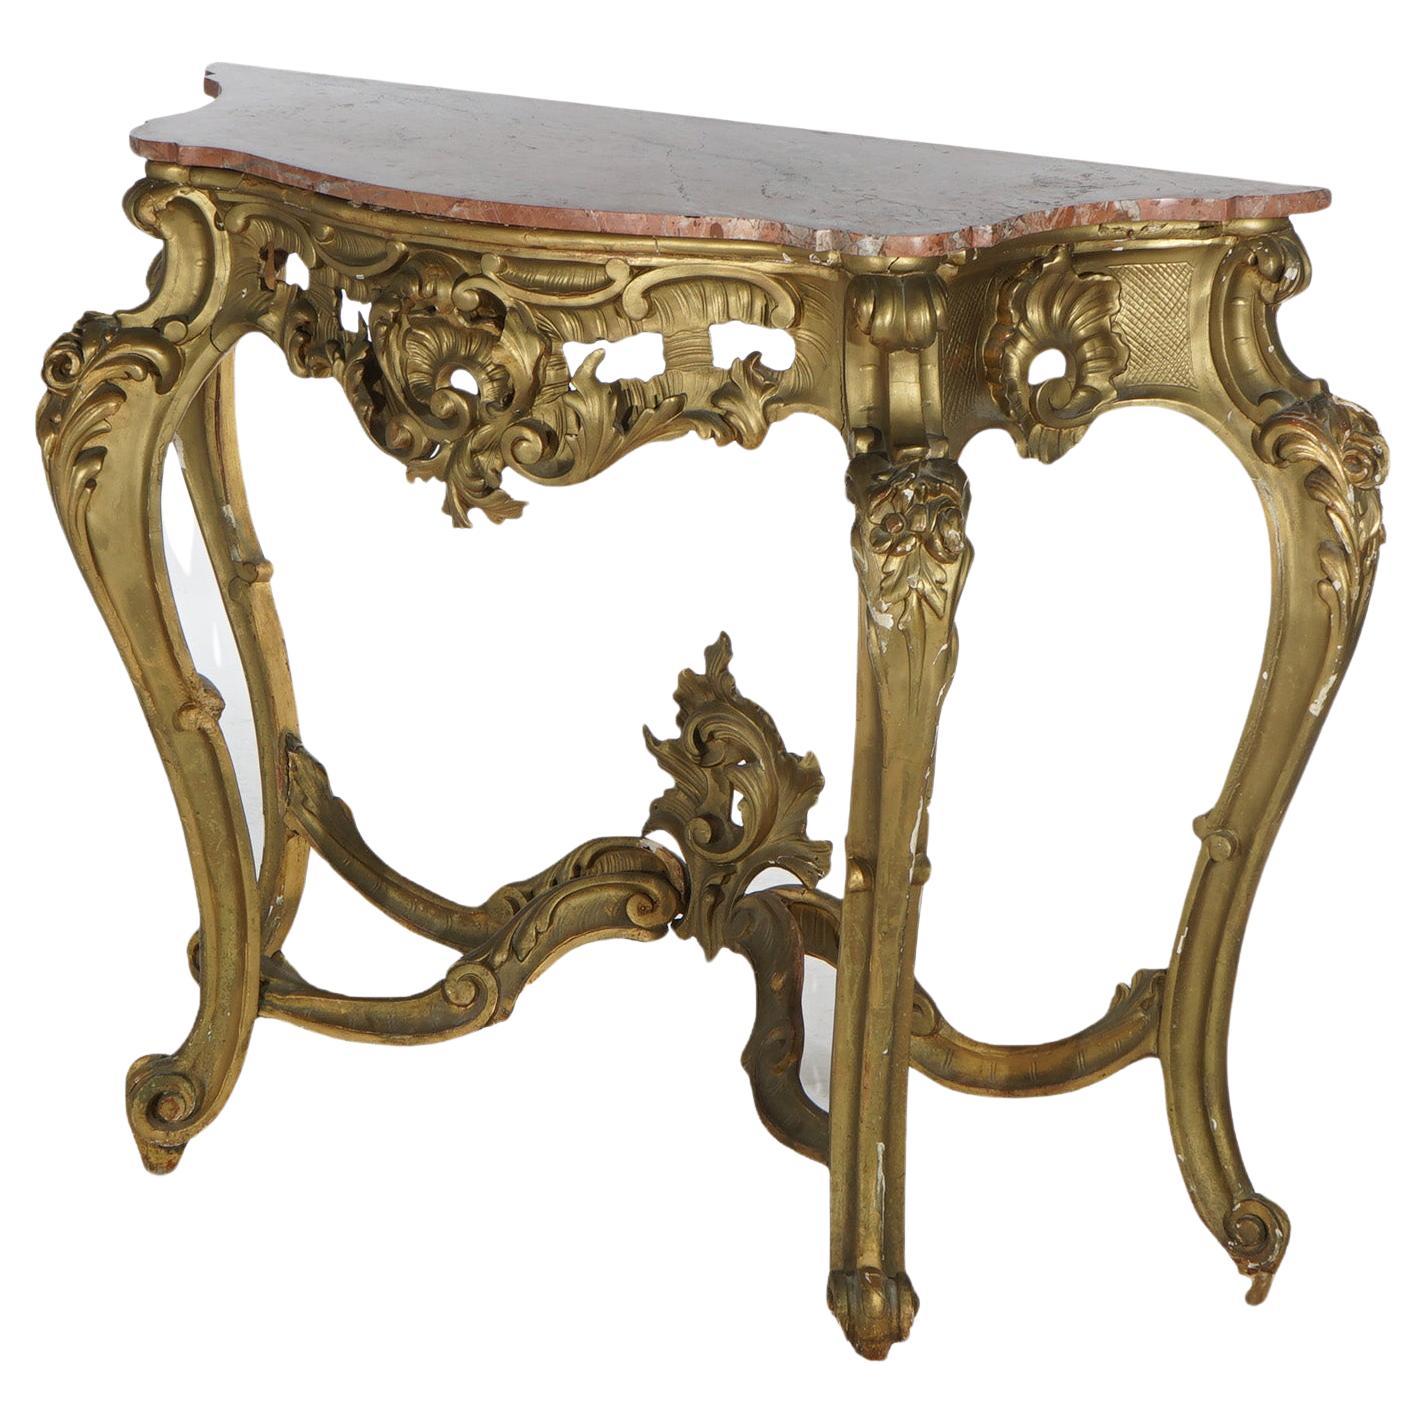 Antique French Rococo Style Giltwood & Marble Top Console Table C1890